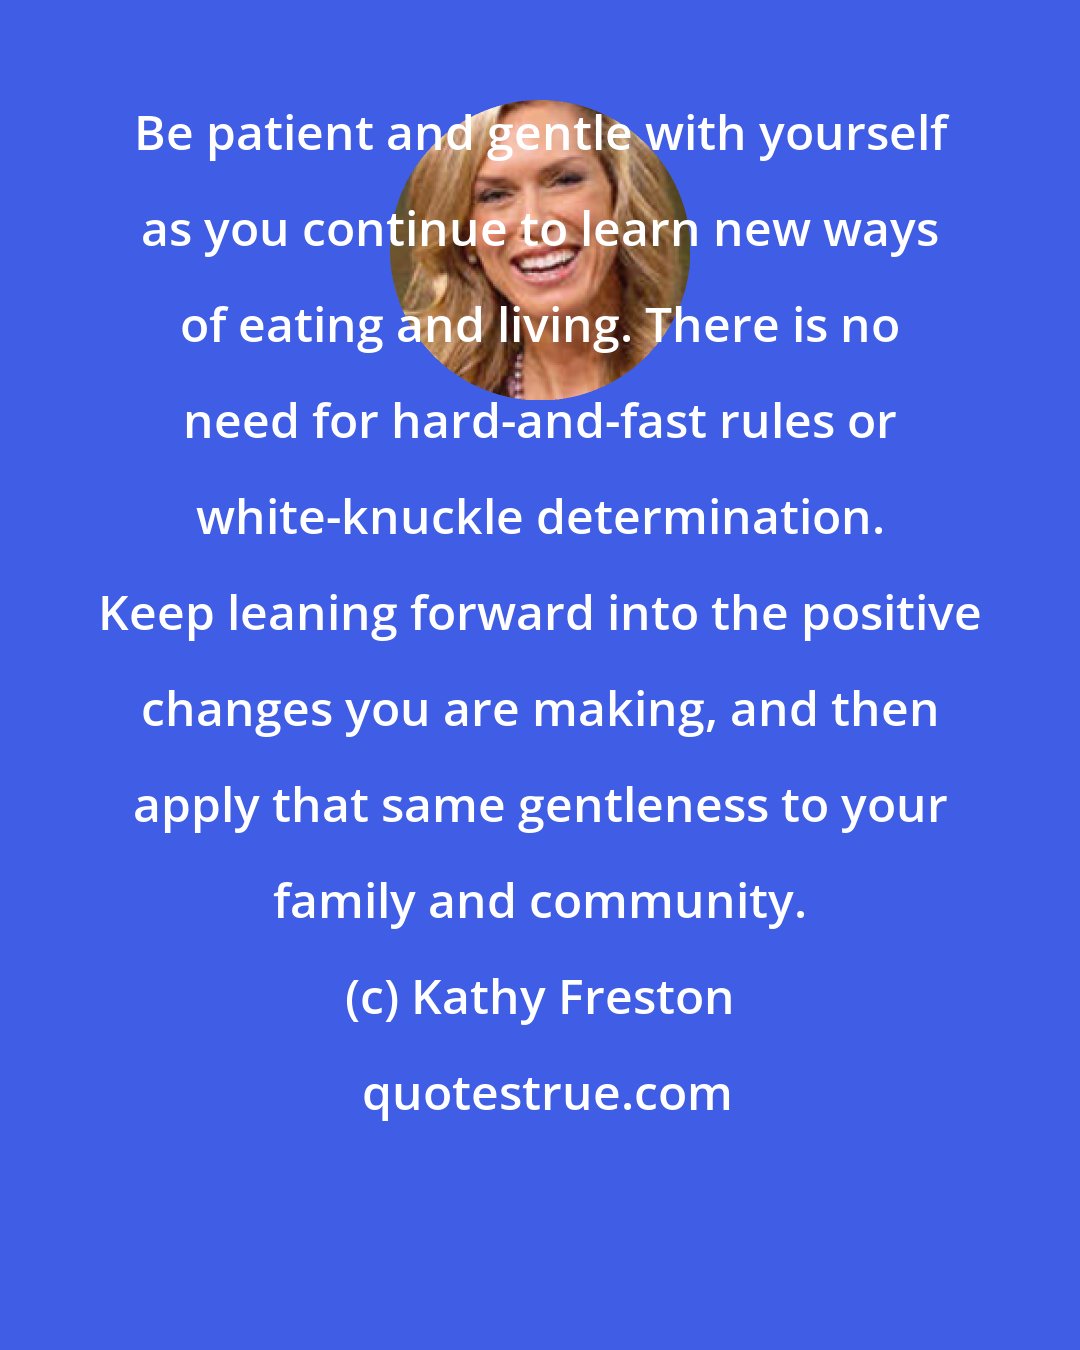 Kathy Freston: Be patient and gentle with yourself as you continue to learn new ways of eating and living. There is no need for hard-and-fast rules or white-knuckle determination. Keep leaning forward into the positive changes you are making, and then apply that same gentleness to your family and community.